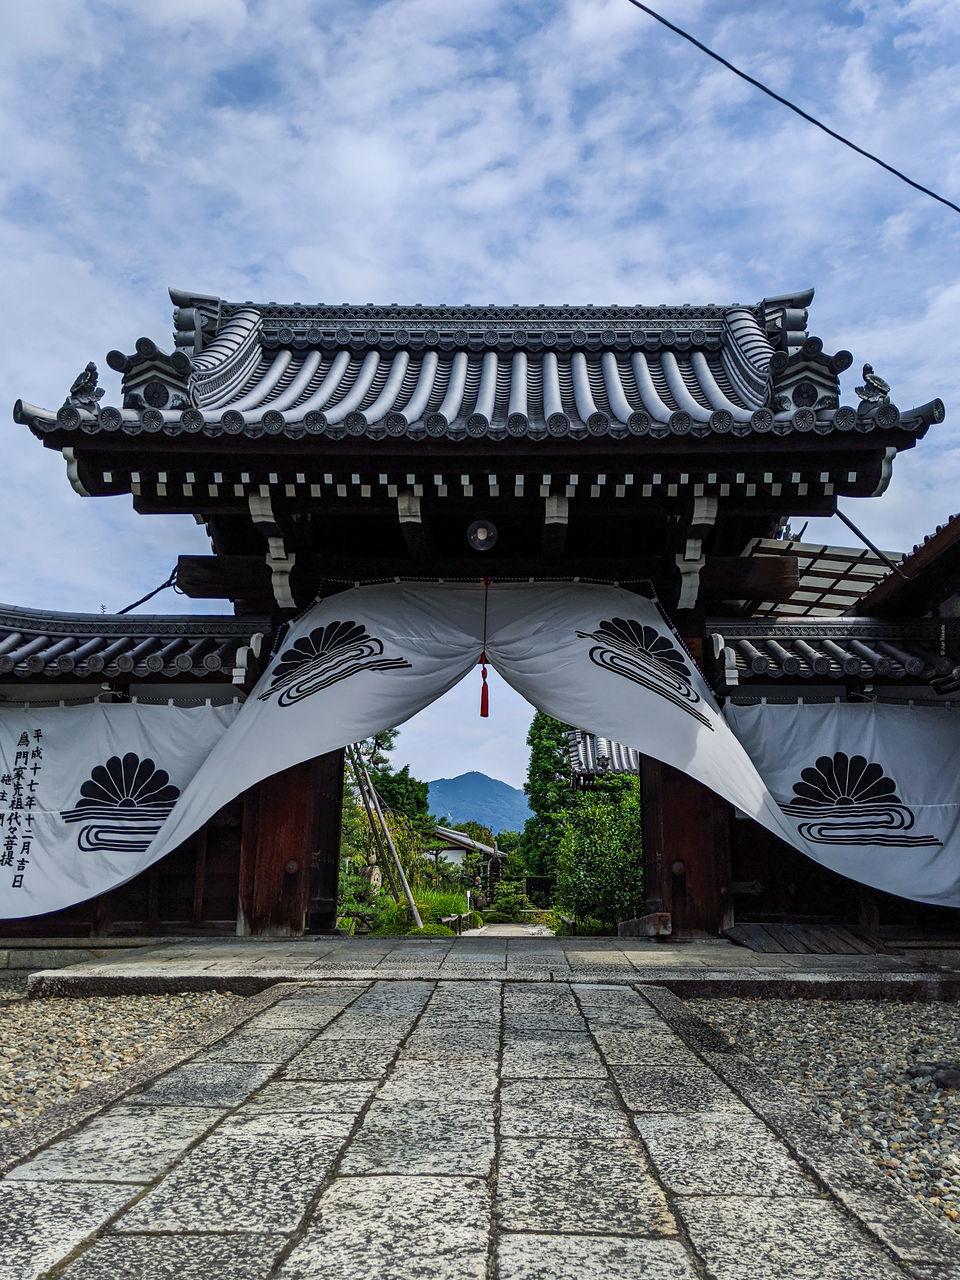 architecture, built structure, building exterior, sky, cloud, building, nature, travel destinations, history, the past, roof, no people, religion, tradition, travel, city, belief, day, outdoors, chinese architecture, place of worship, temple - building, landmark, tourism, gate, spirituality, temple, plant